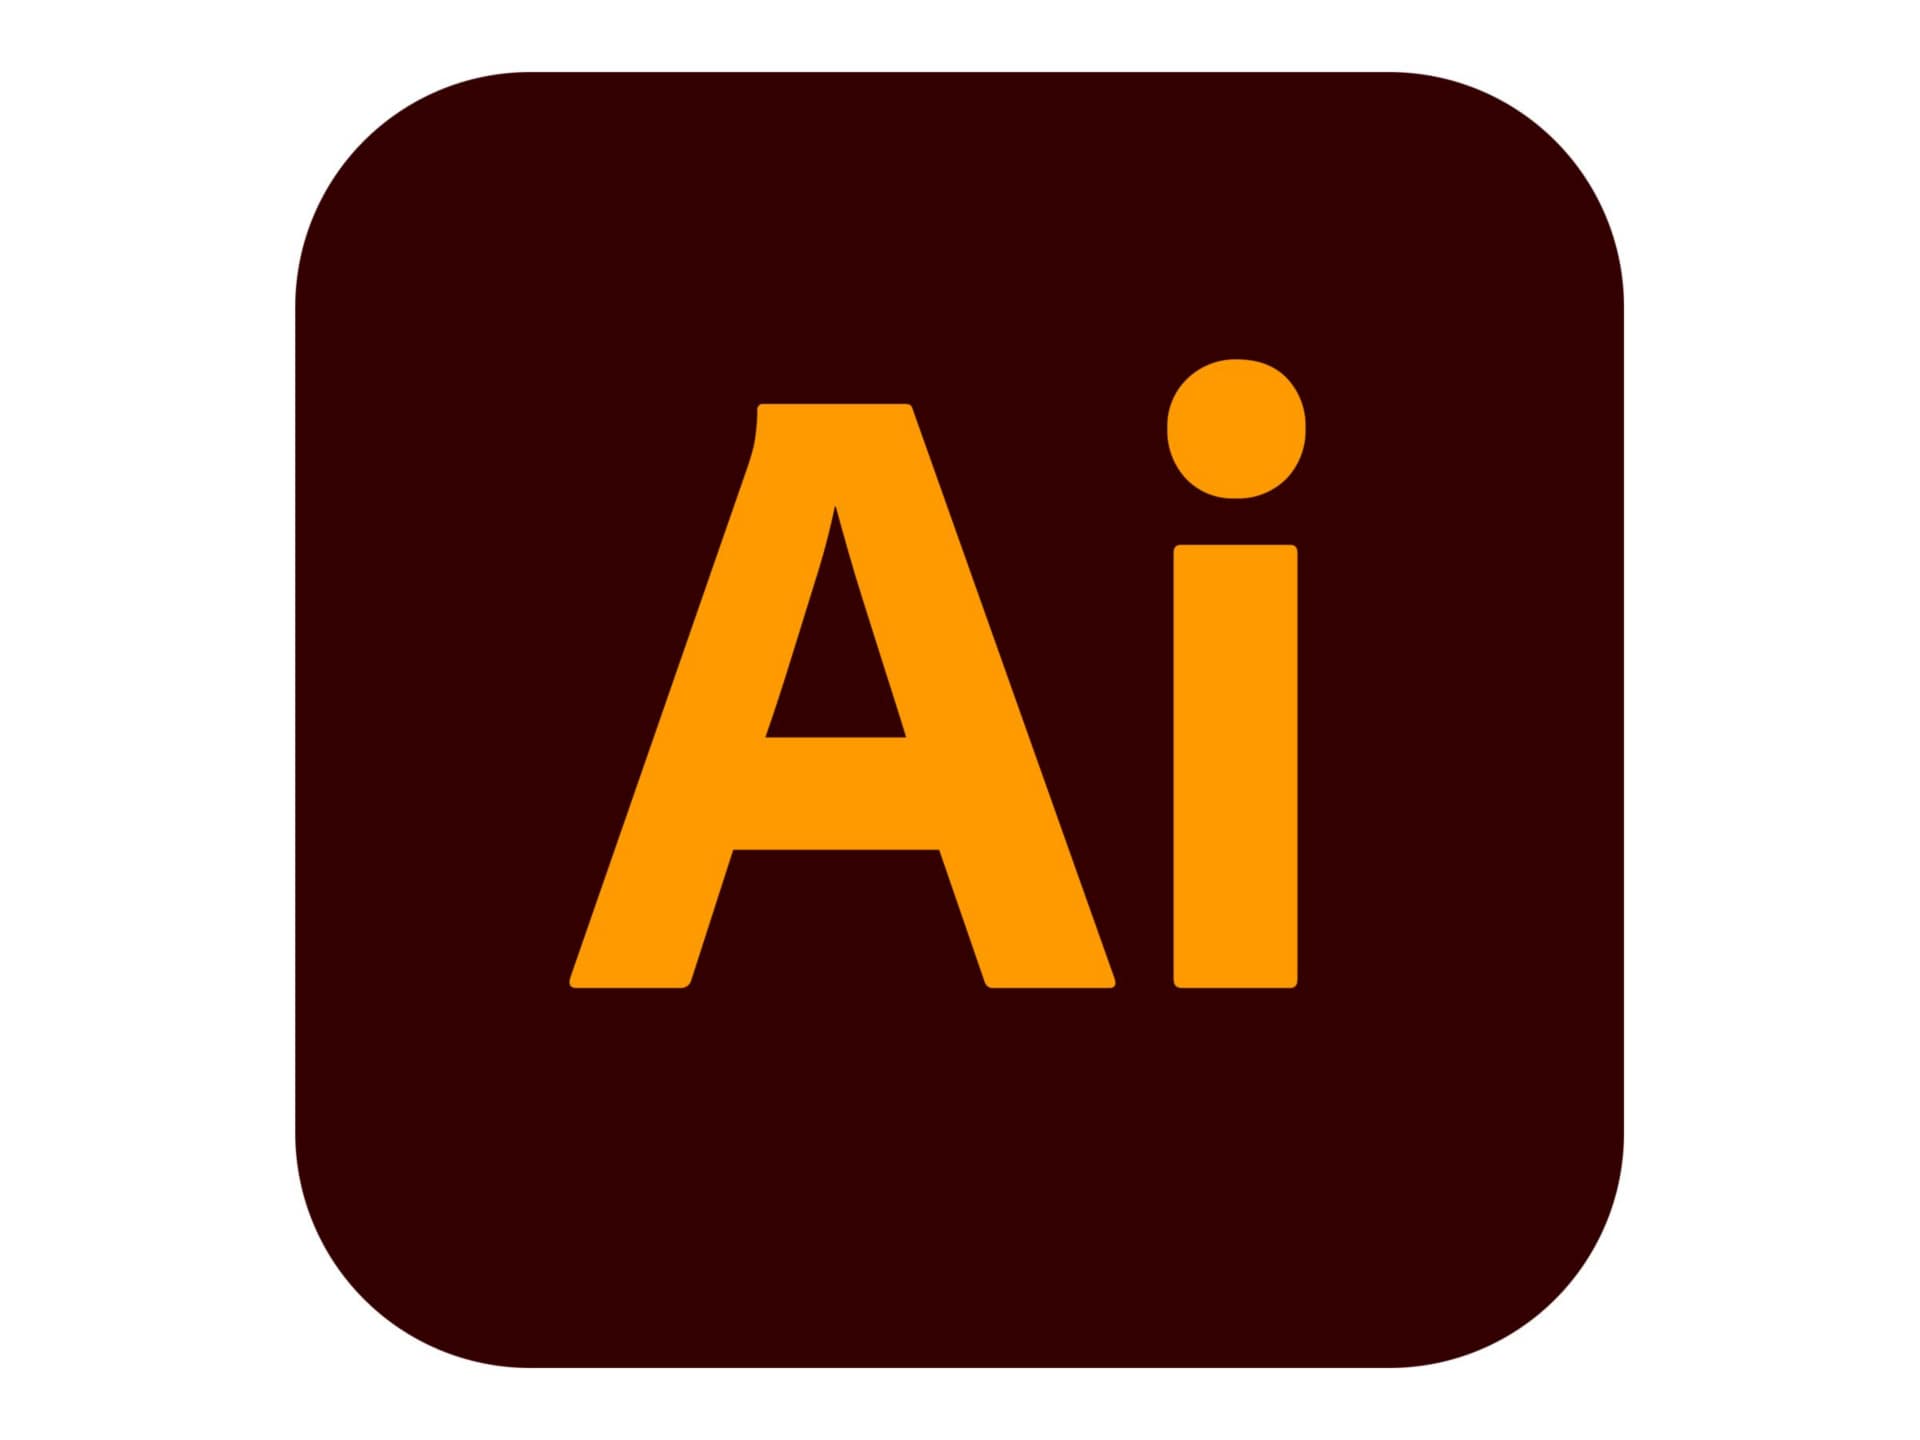 Adobe Illustrator CC for teams - Subscription New (6 months) - 1 named user